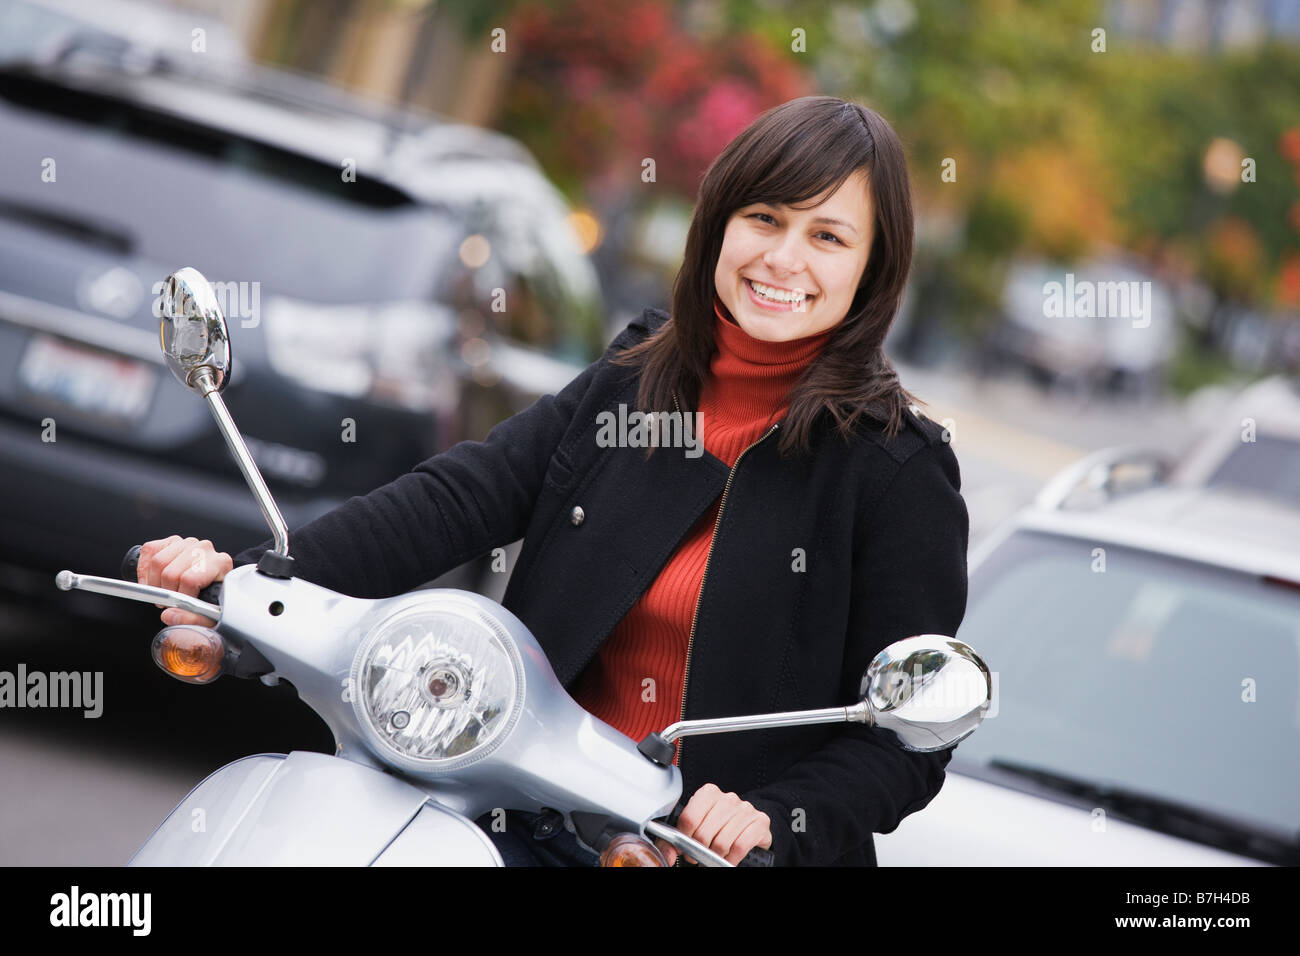 Mixed Race woman driving scooter Banque D'Images